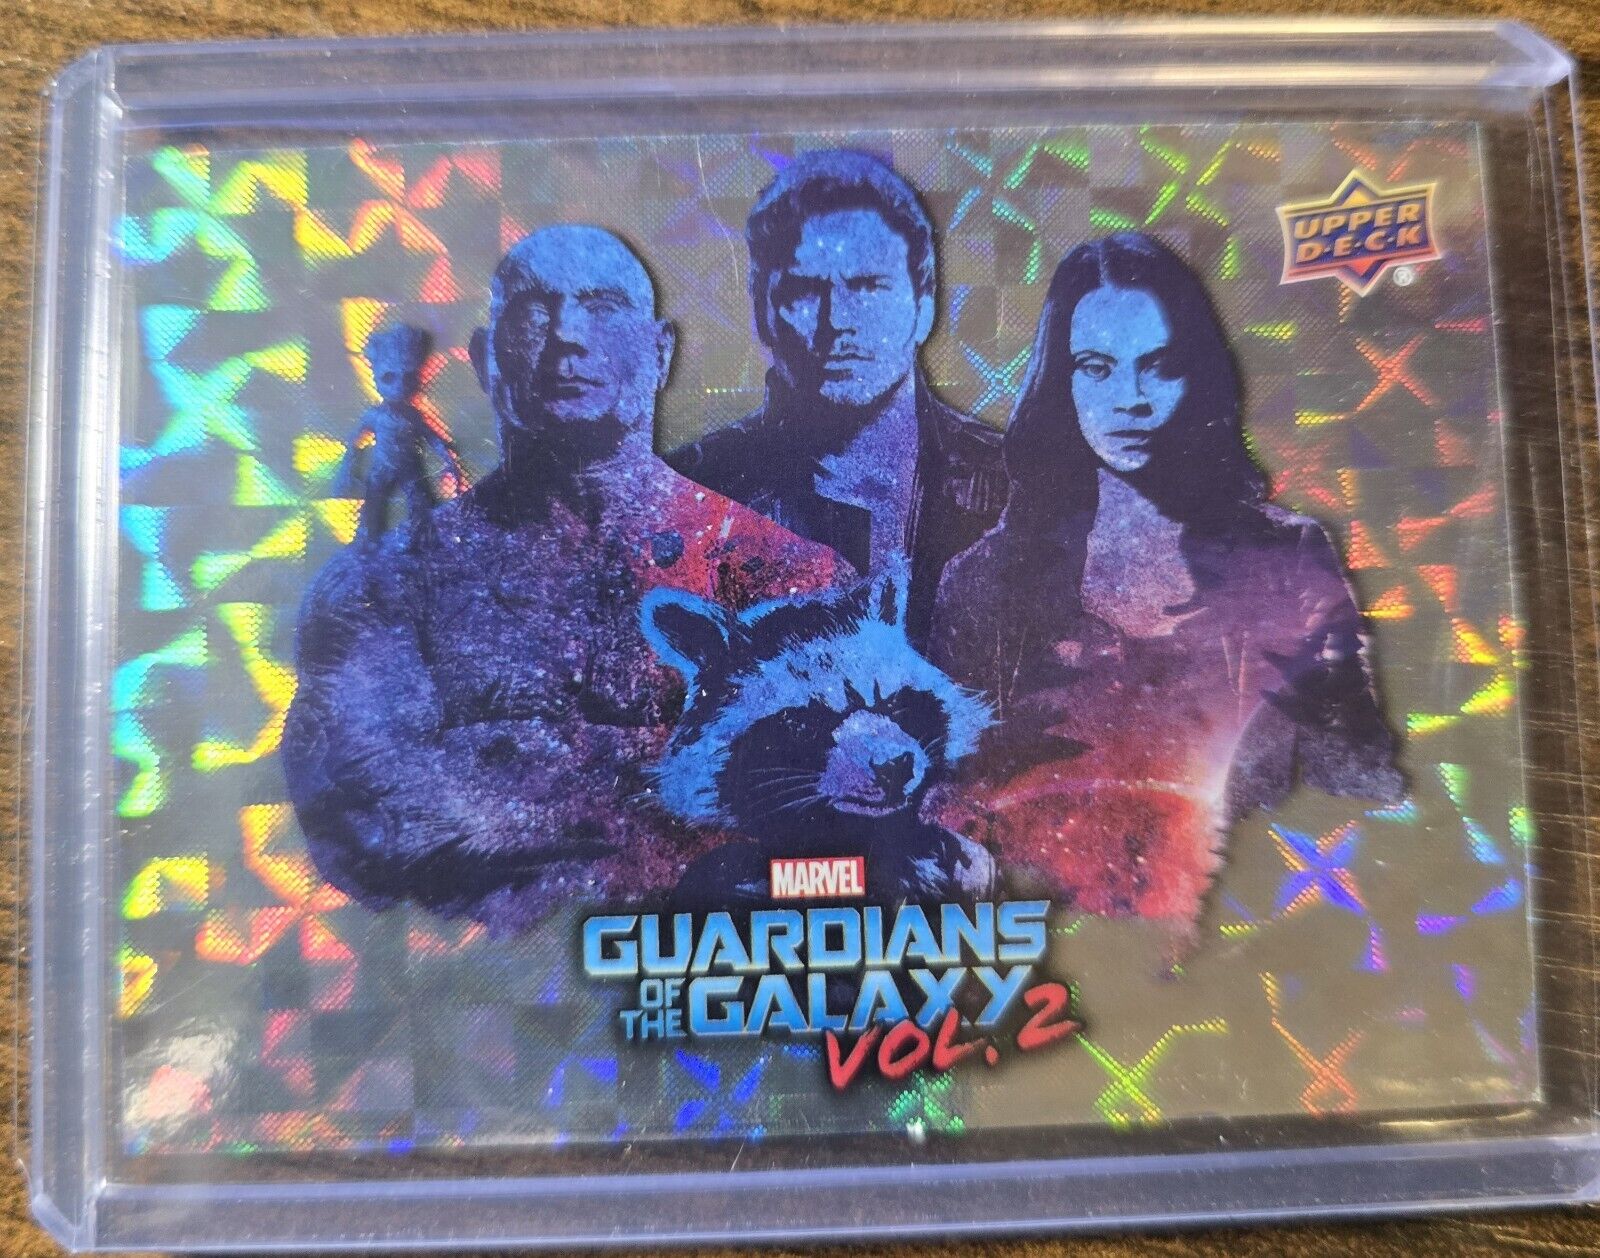 2017 Marvel Volume 2 Cinematic Universe Promotional Guardians of the Galaxy Holo